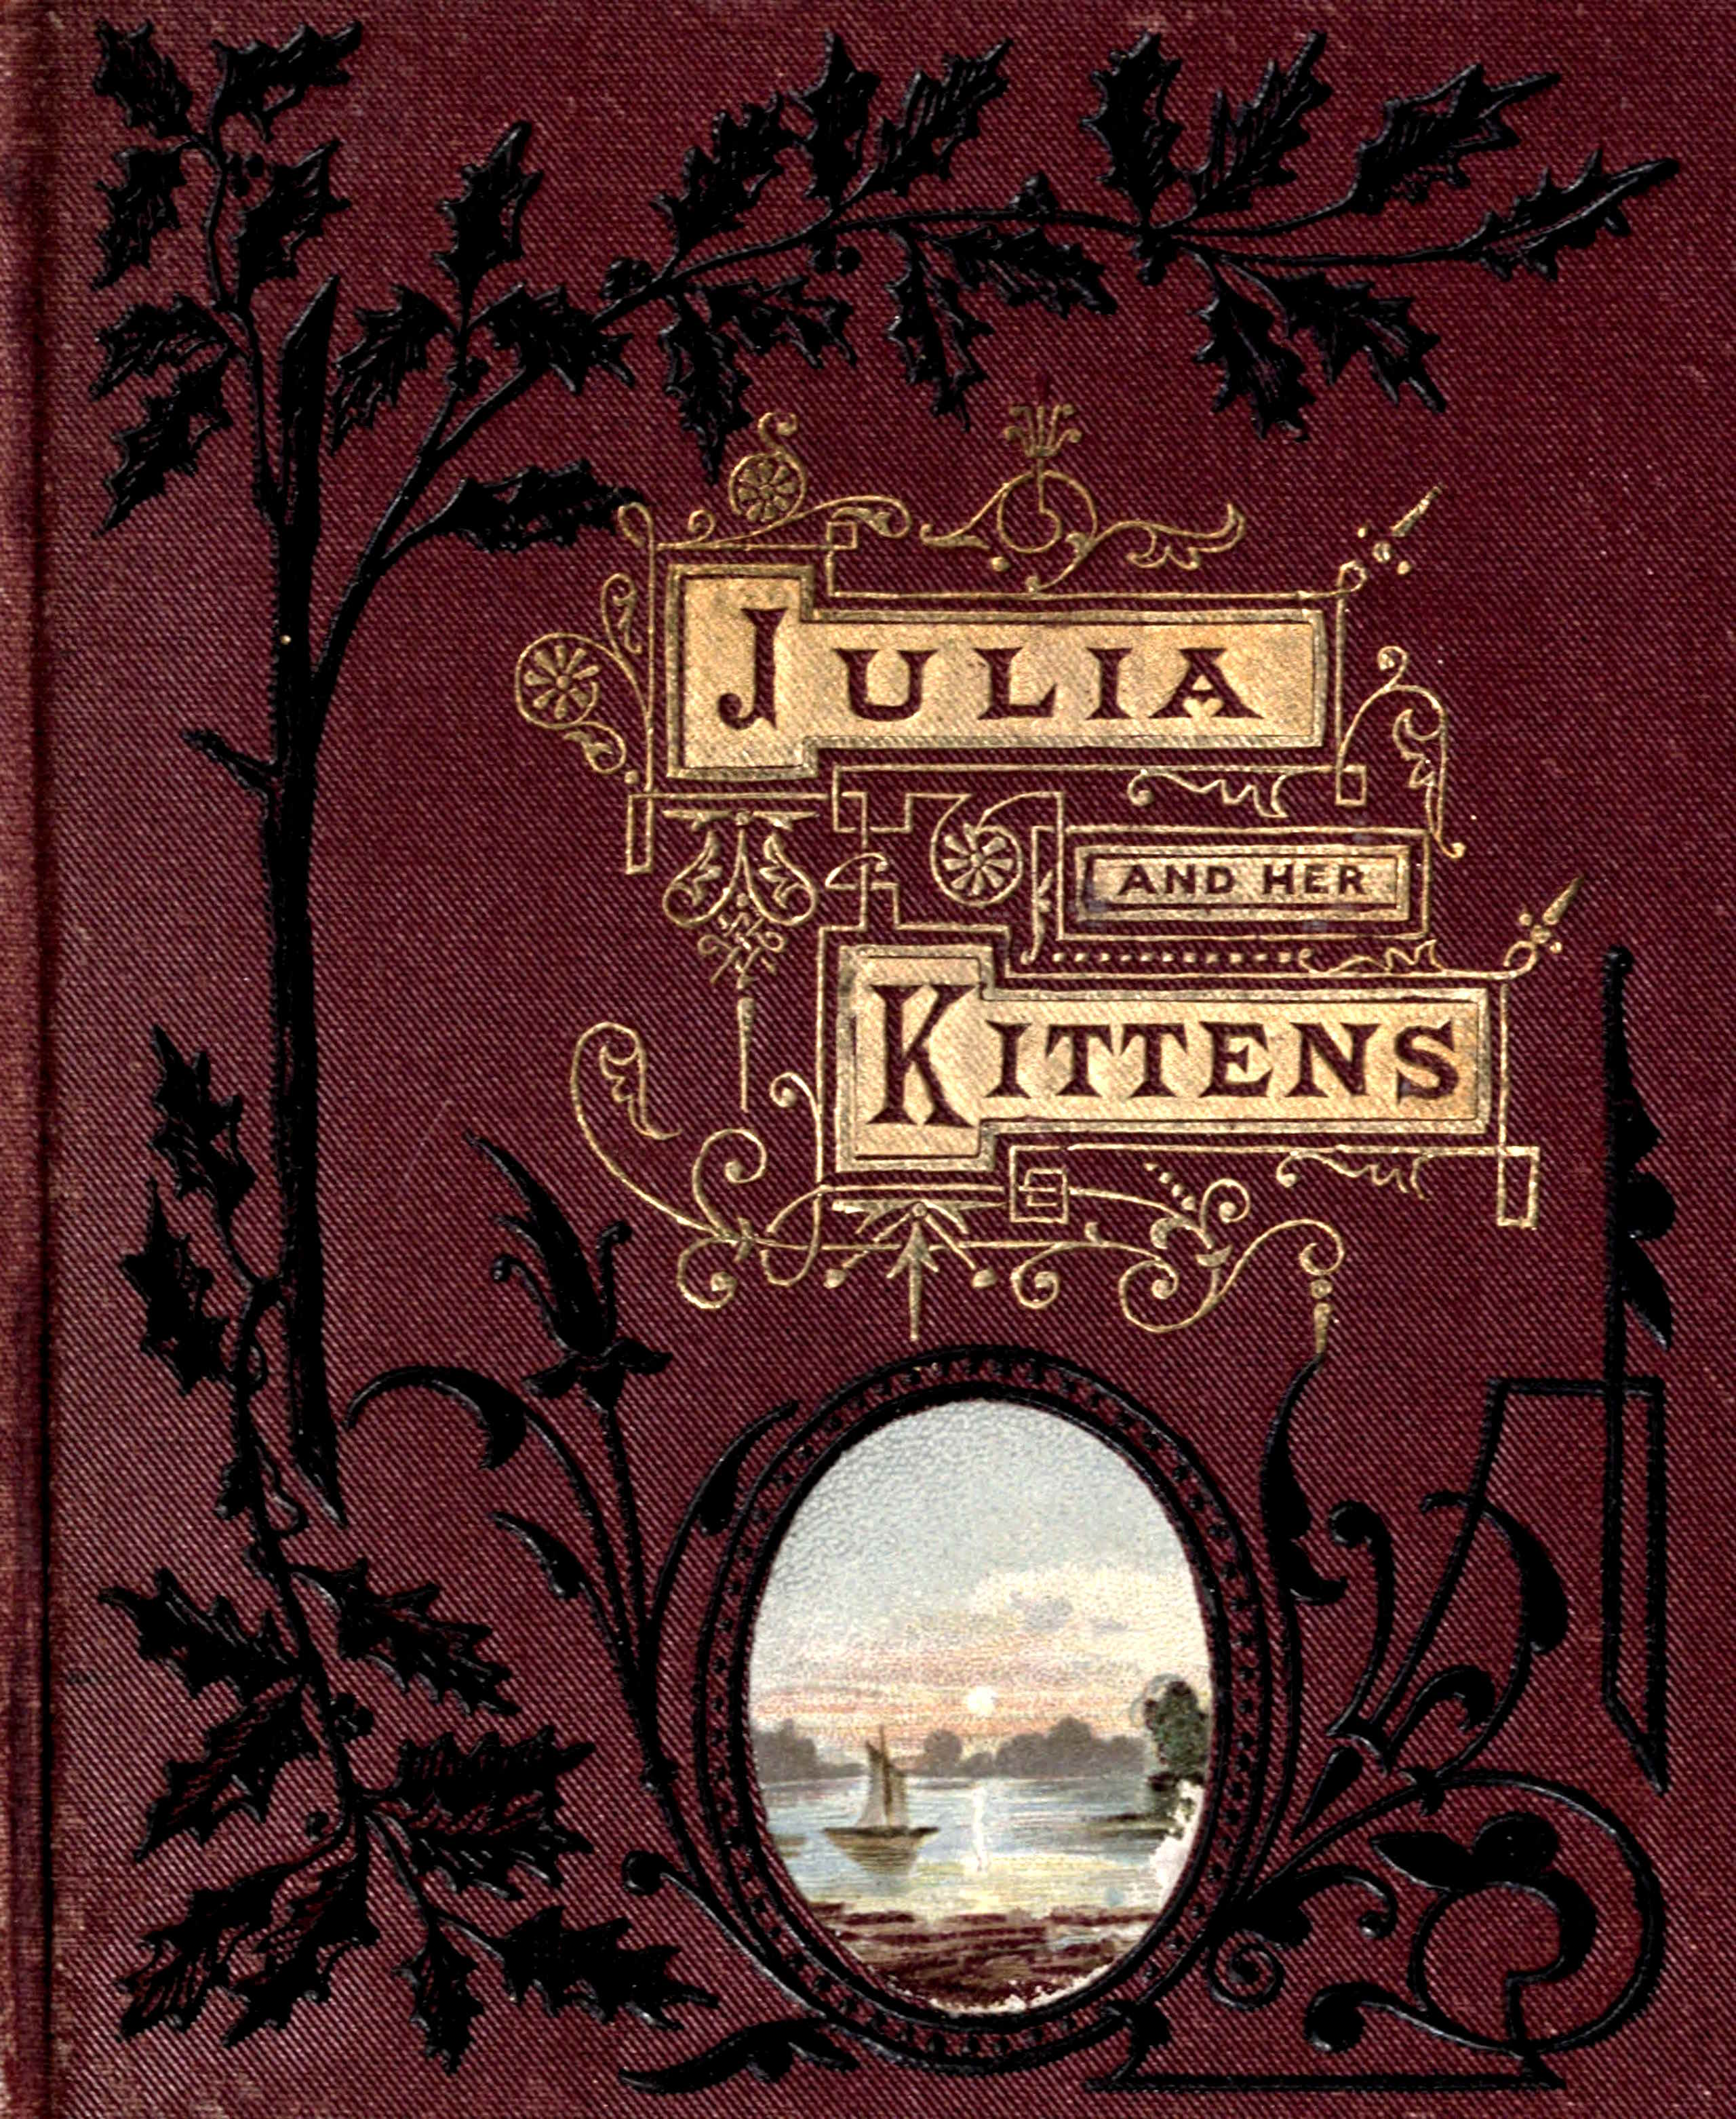 Julia Cary and her kitten